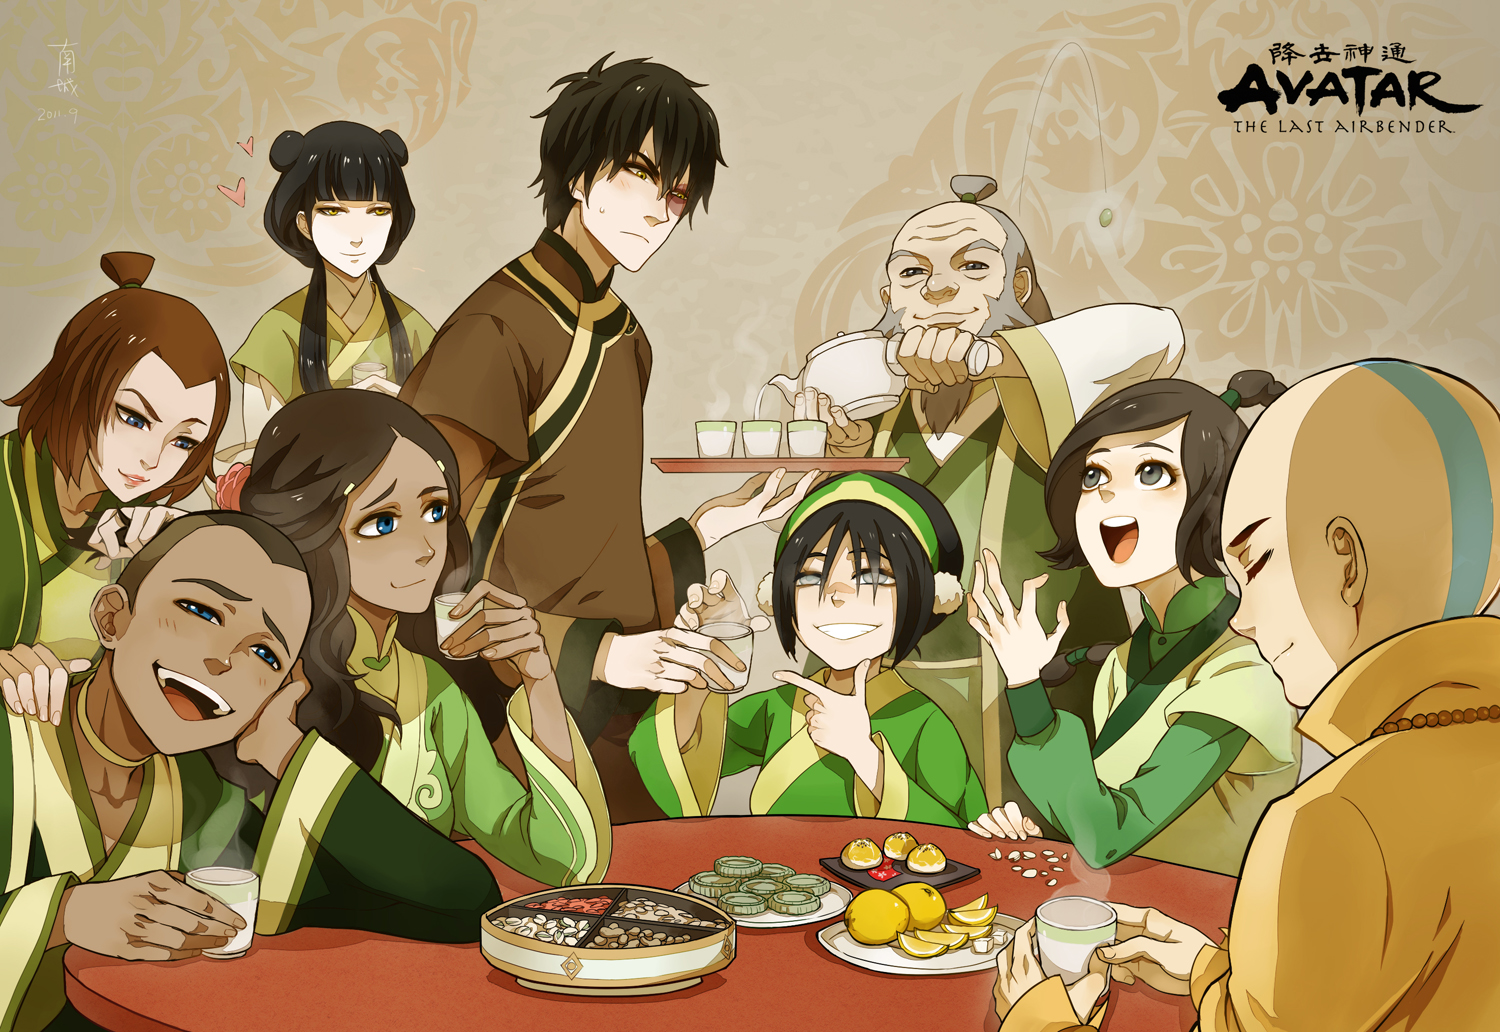 14 Quality Avatar The Last Airbender Wallpapers, Anime & Manga